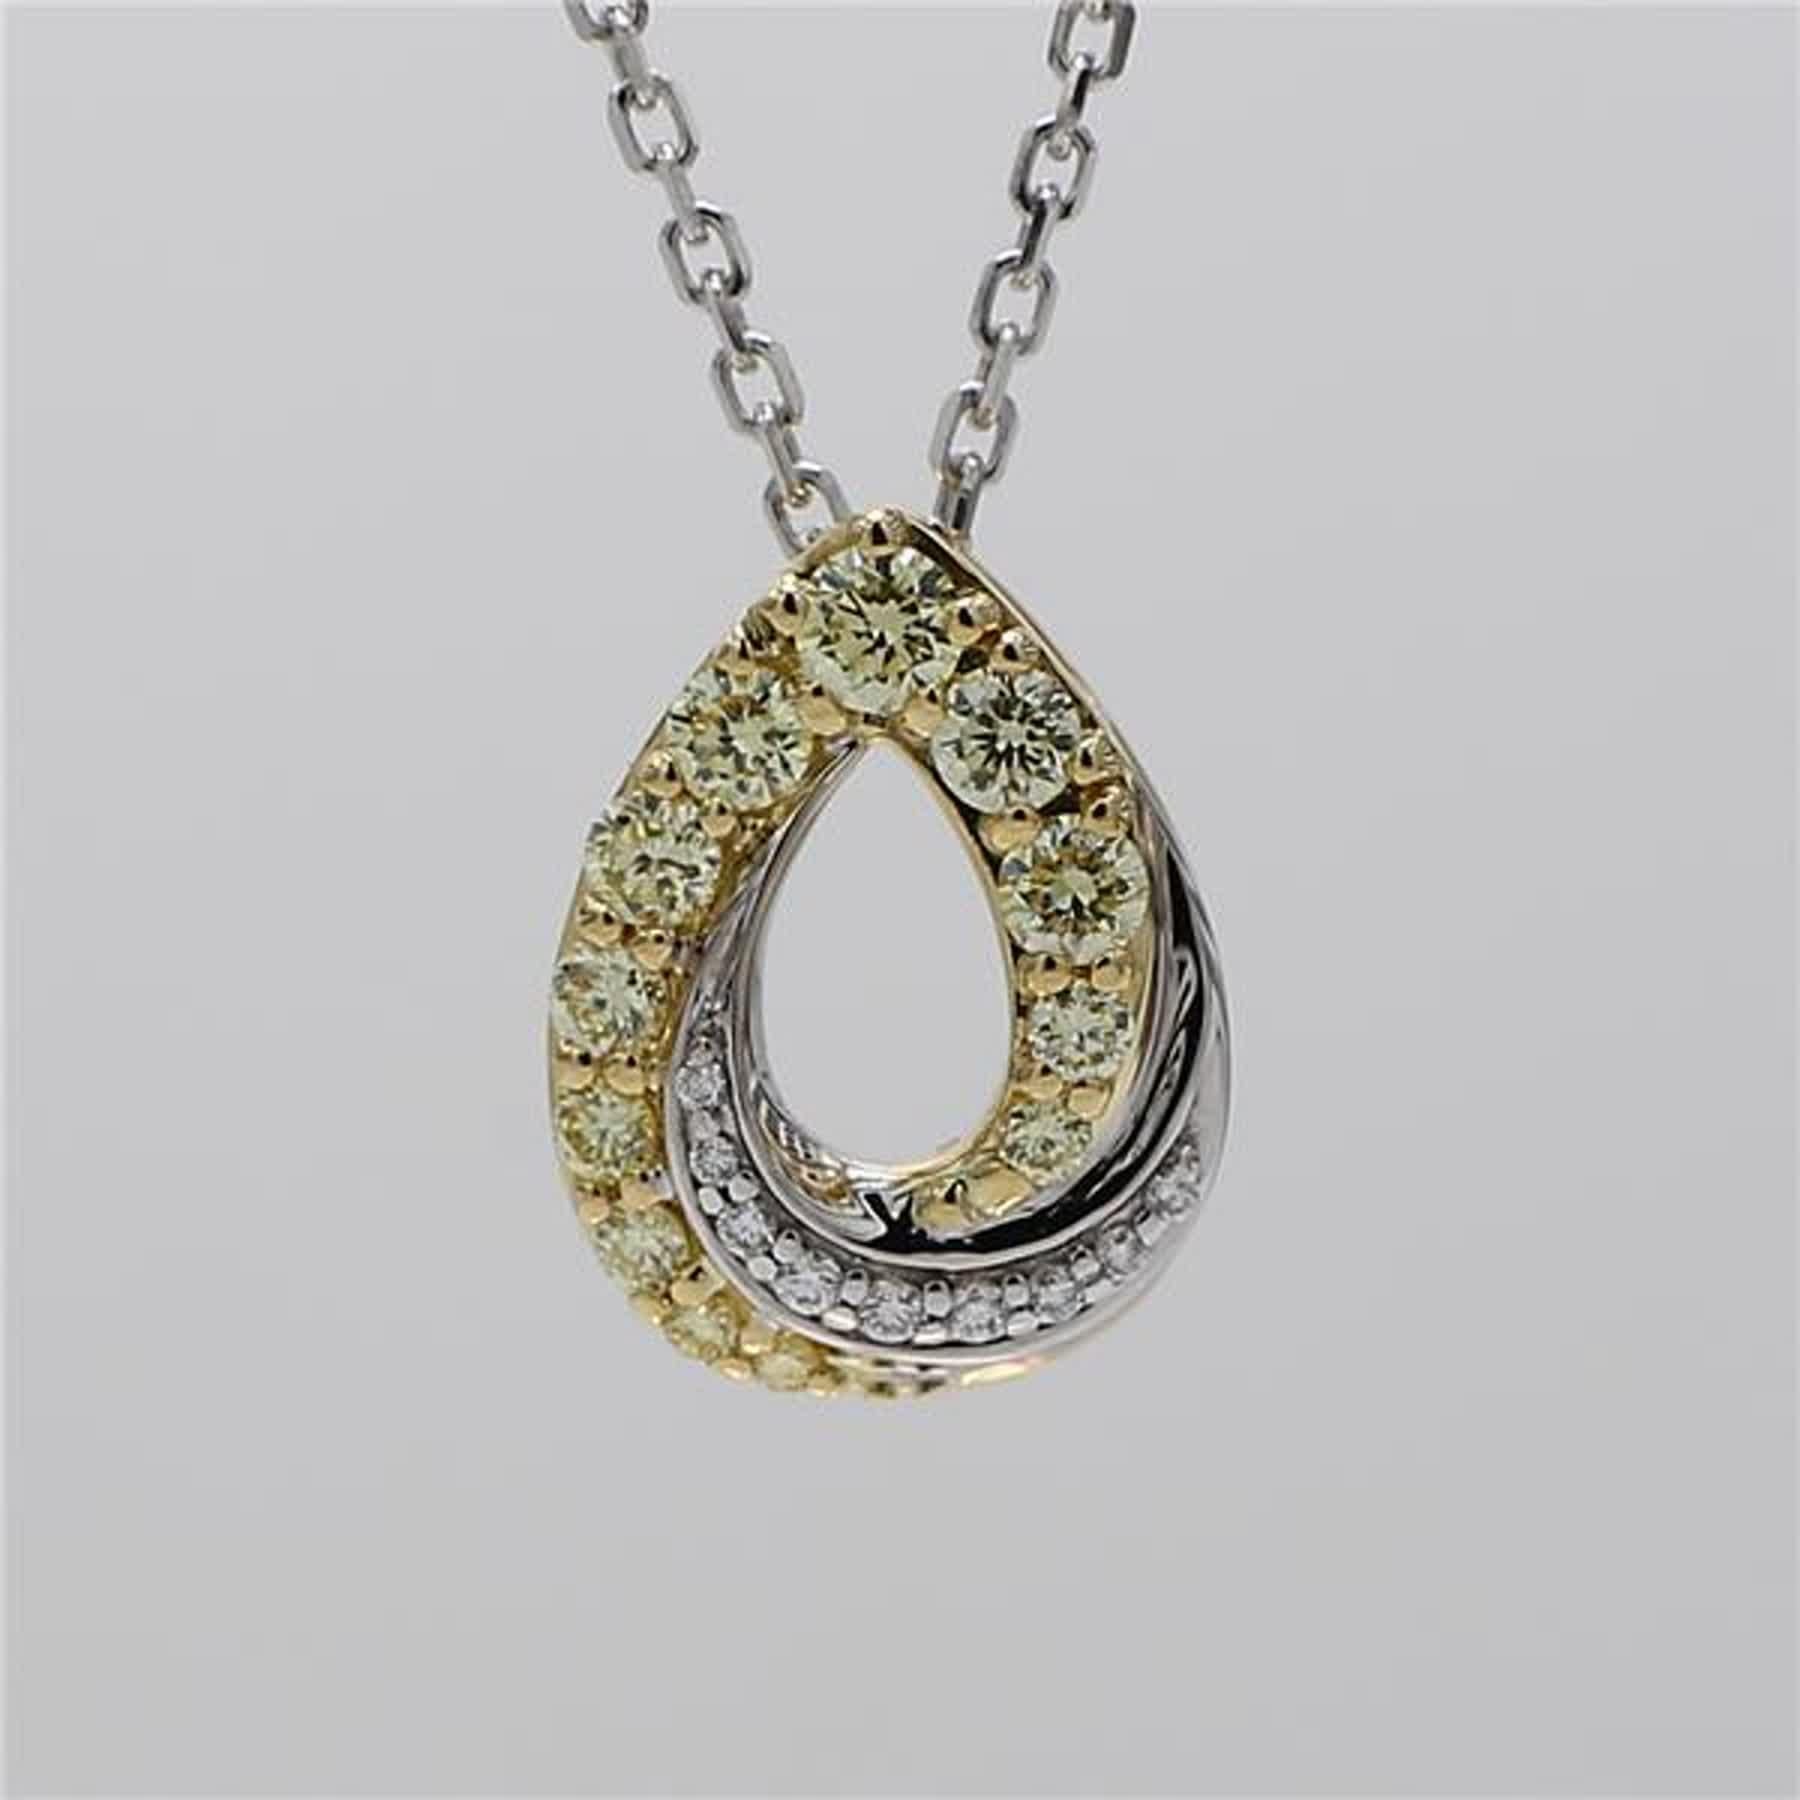 RareGemWorld's classic diamond pendant. Mounted in a beautiful 18K Yellow and White Gold setting with natural round yellow diamond melee complimented by natural round white diamond melee. This necklace is guaranteed to impress and enhance your